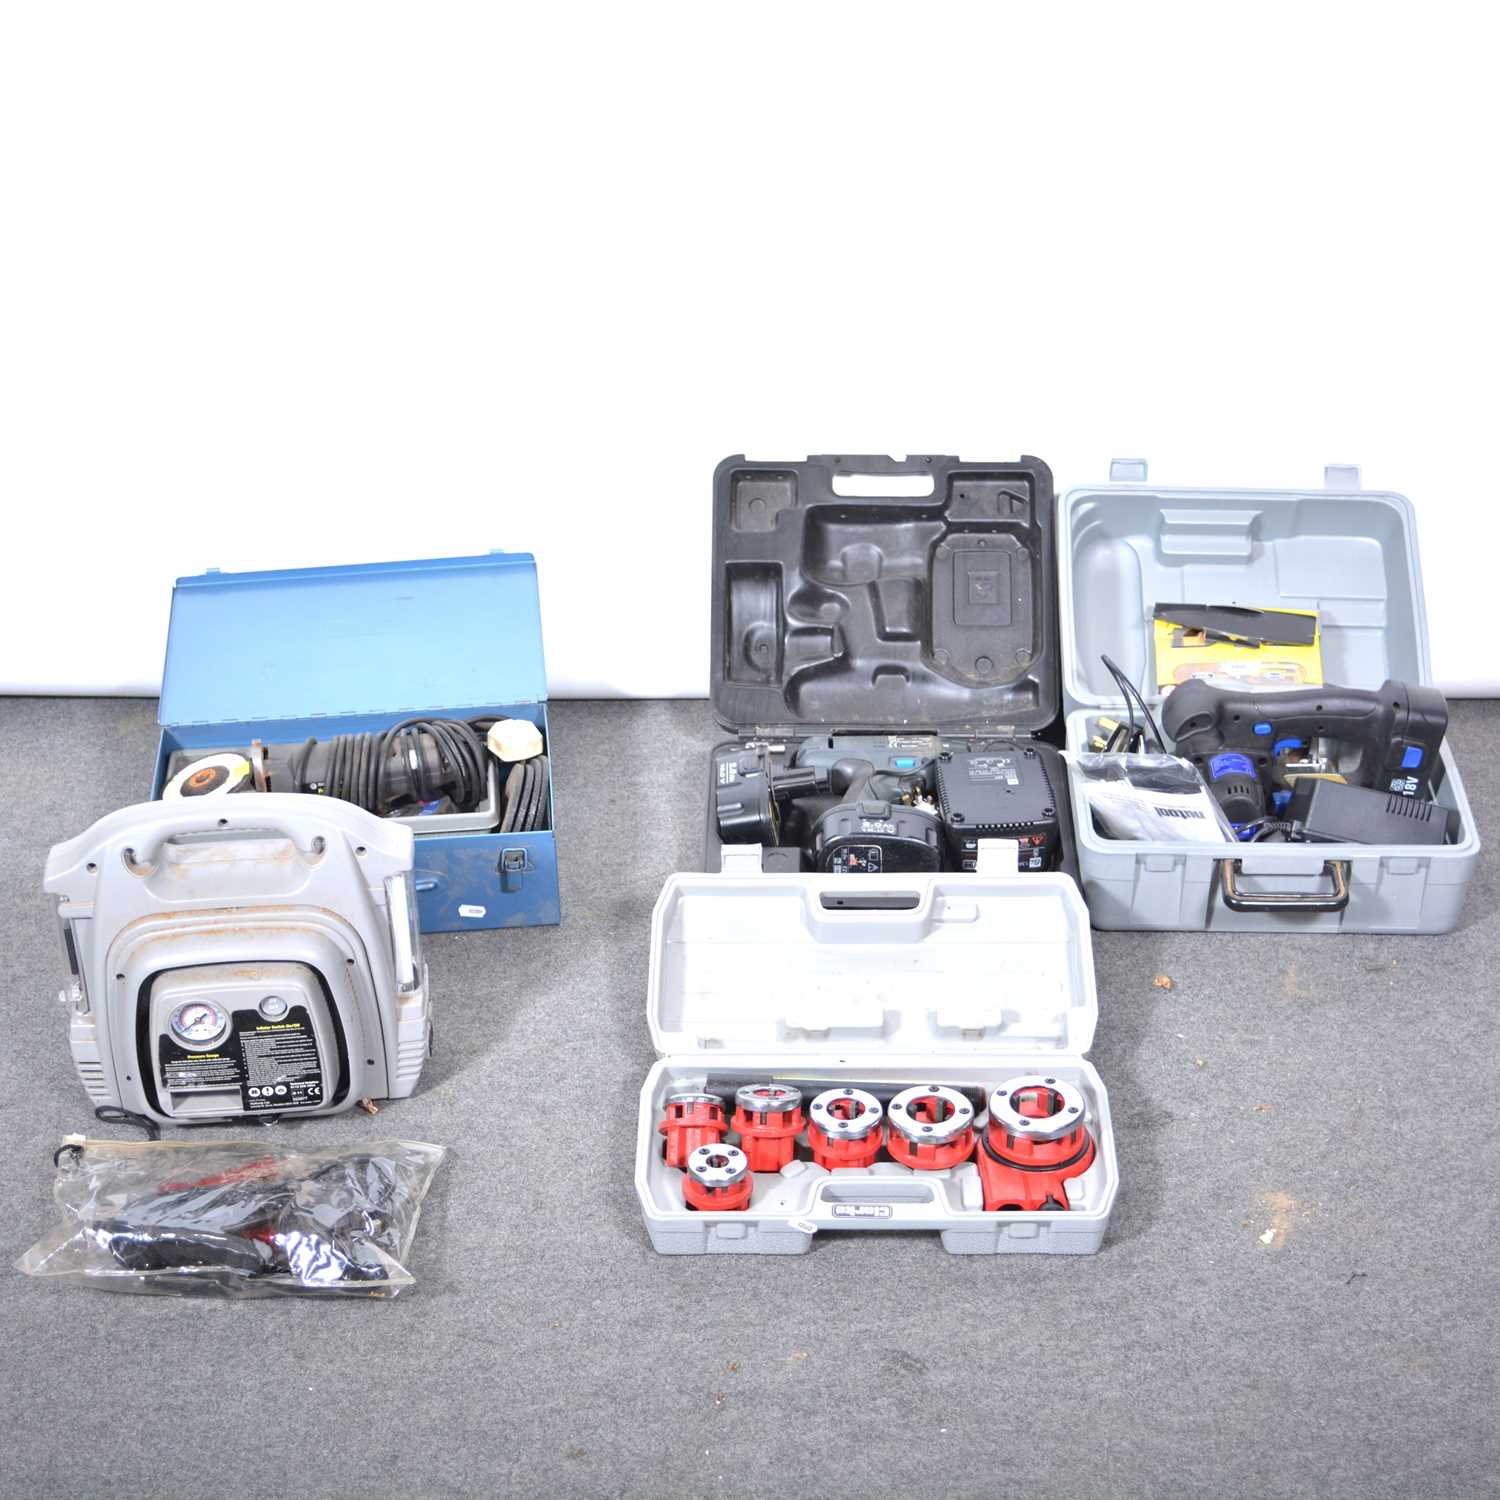 Lot 41 - A Elu cordless drill, Nutool cordless handsaw, Black and Decker small grinder and and a Clarke 6 die pipe threading set, Halfords power pack